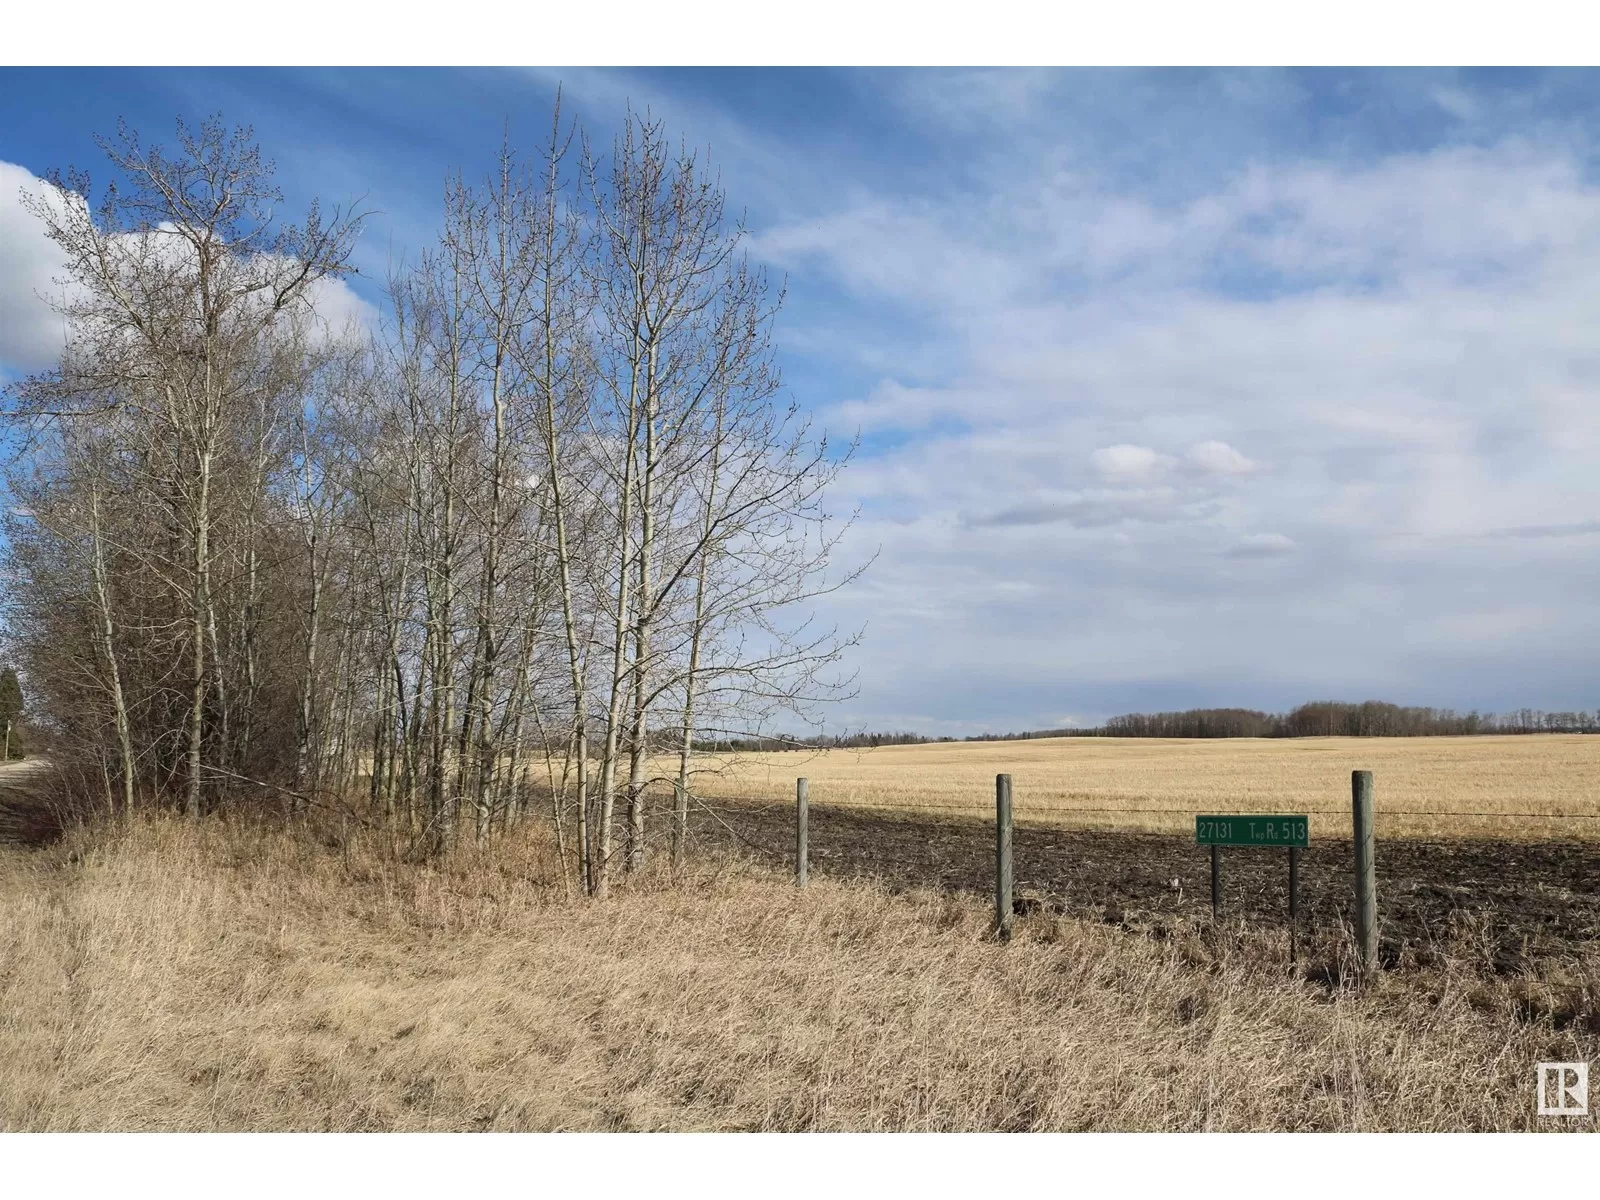 No Building for rent: 27131 Twp Rd 513, Rural Parkland County, Alberta T7Y 1H1